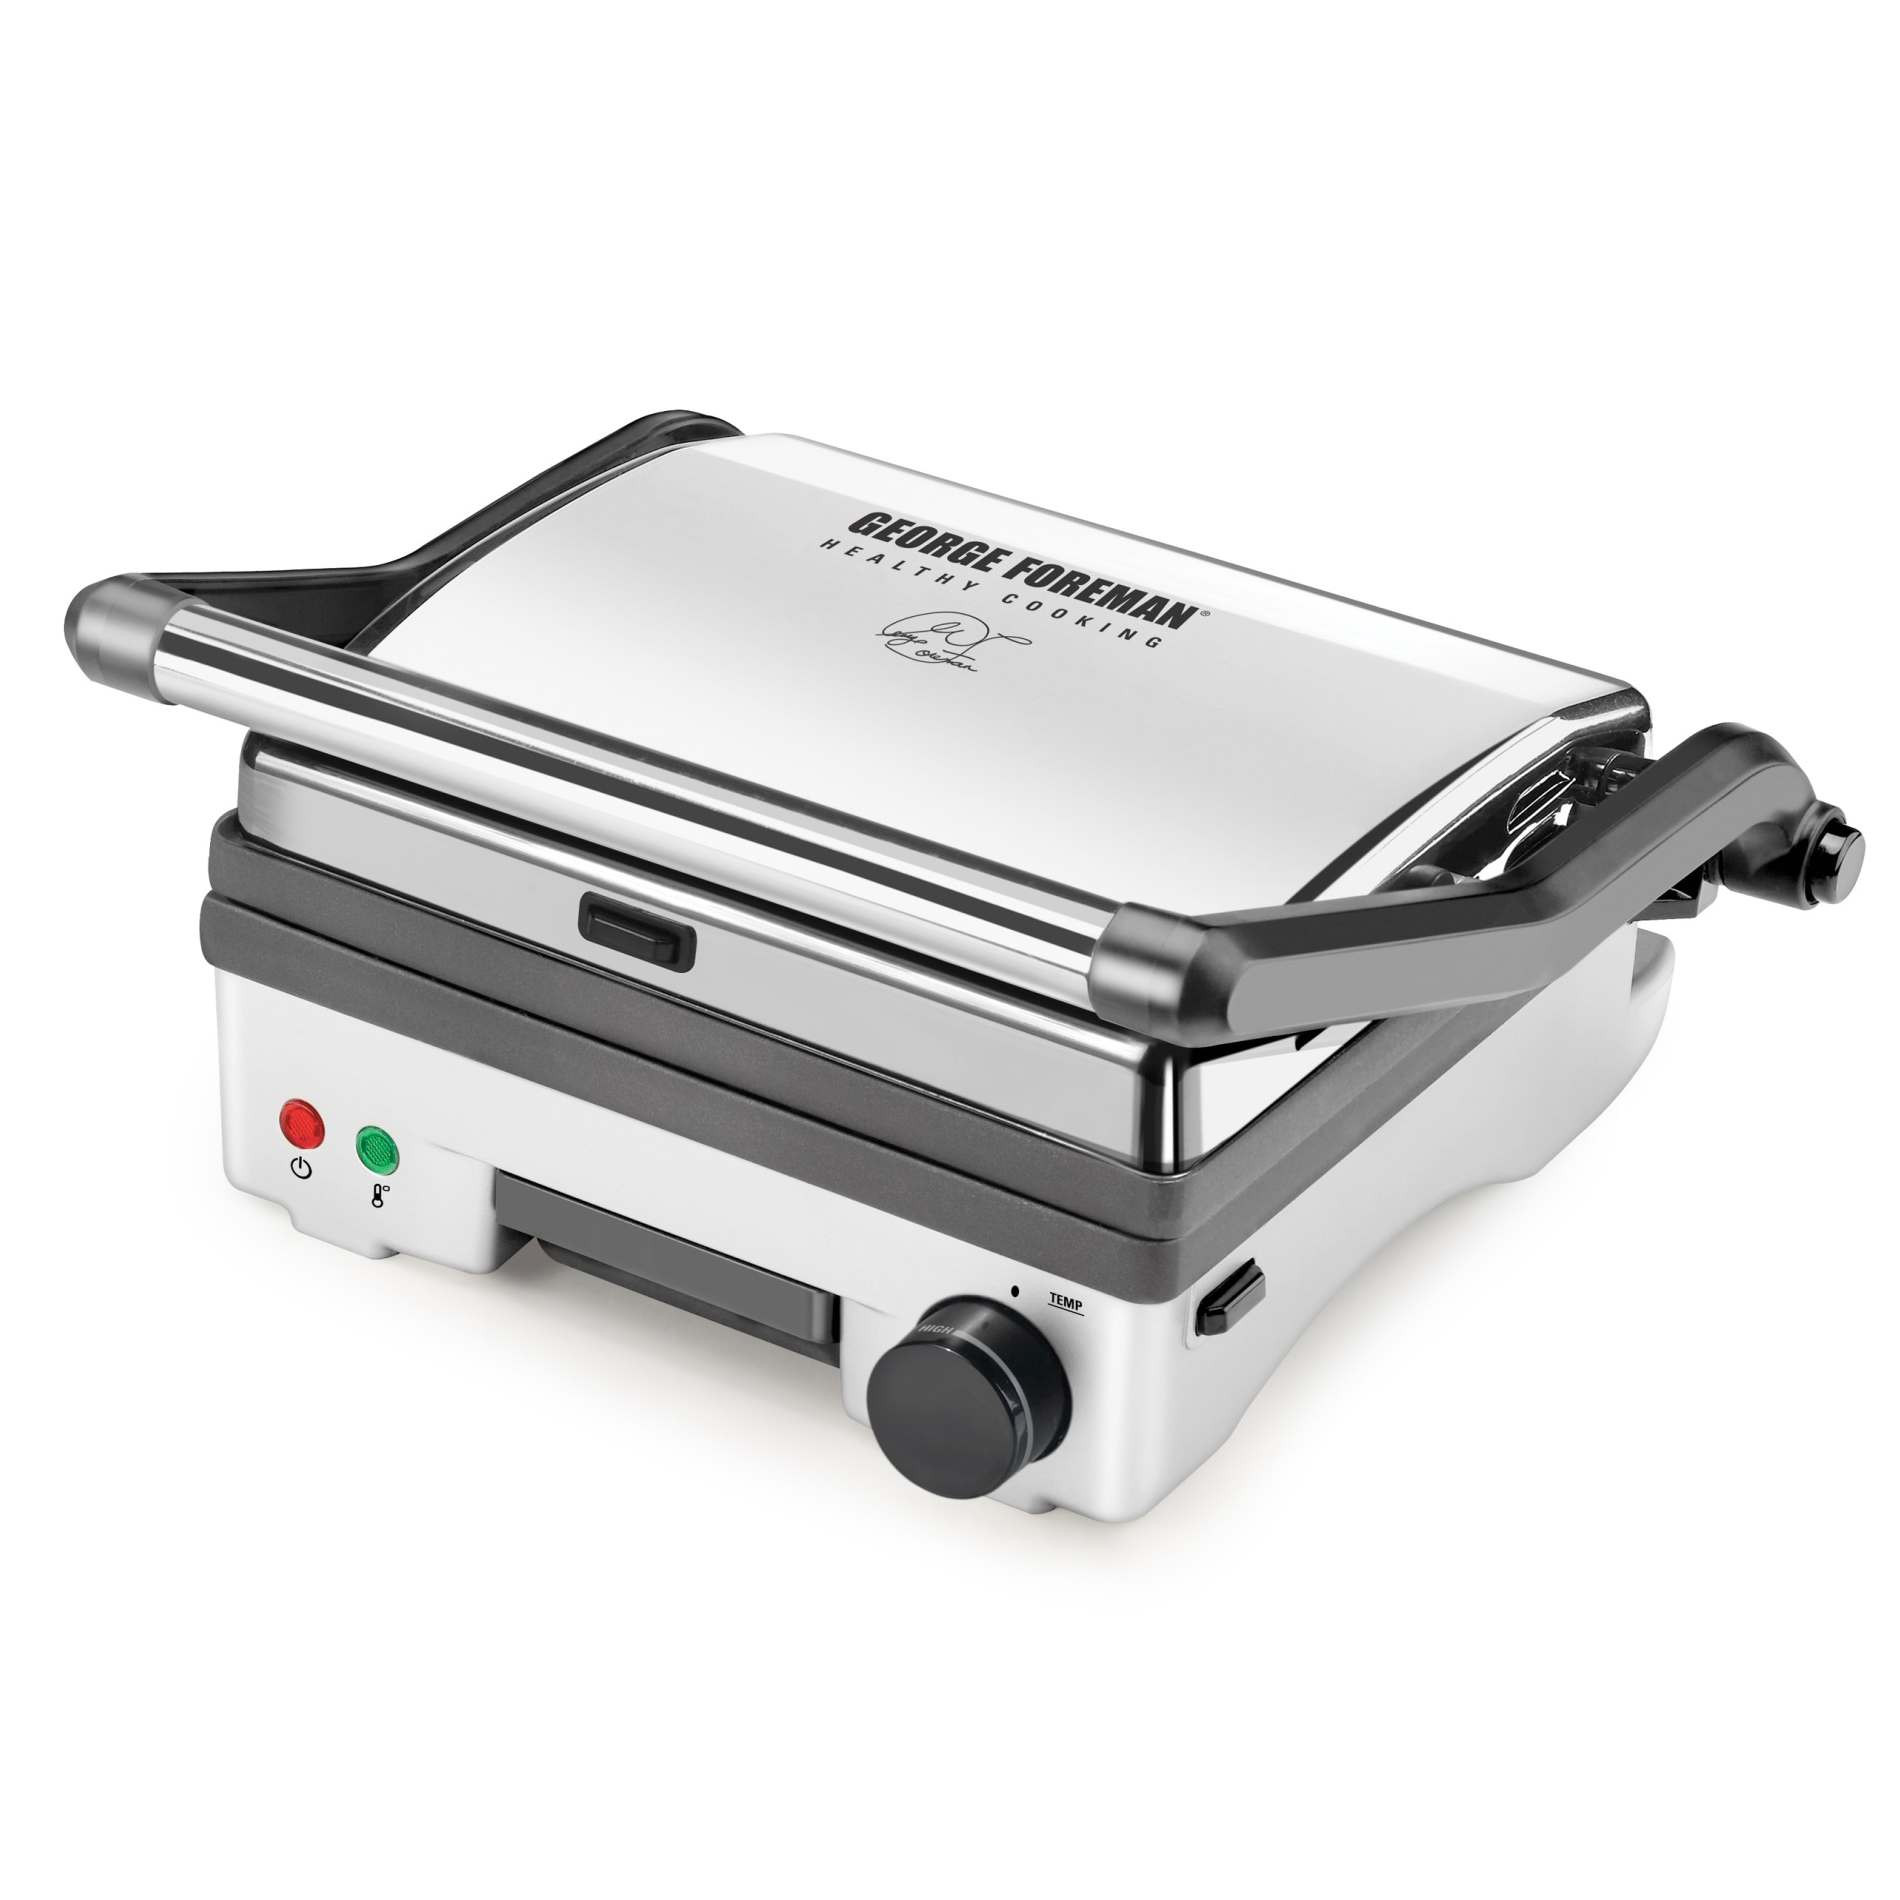 George Foreman Grill Recipes Panini
 George Foreman GR0742S 3 in 1 Panini Press Grill and Open